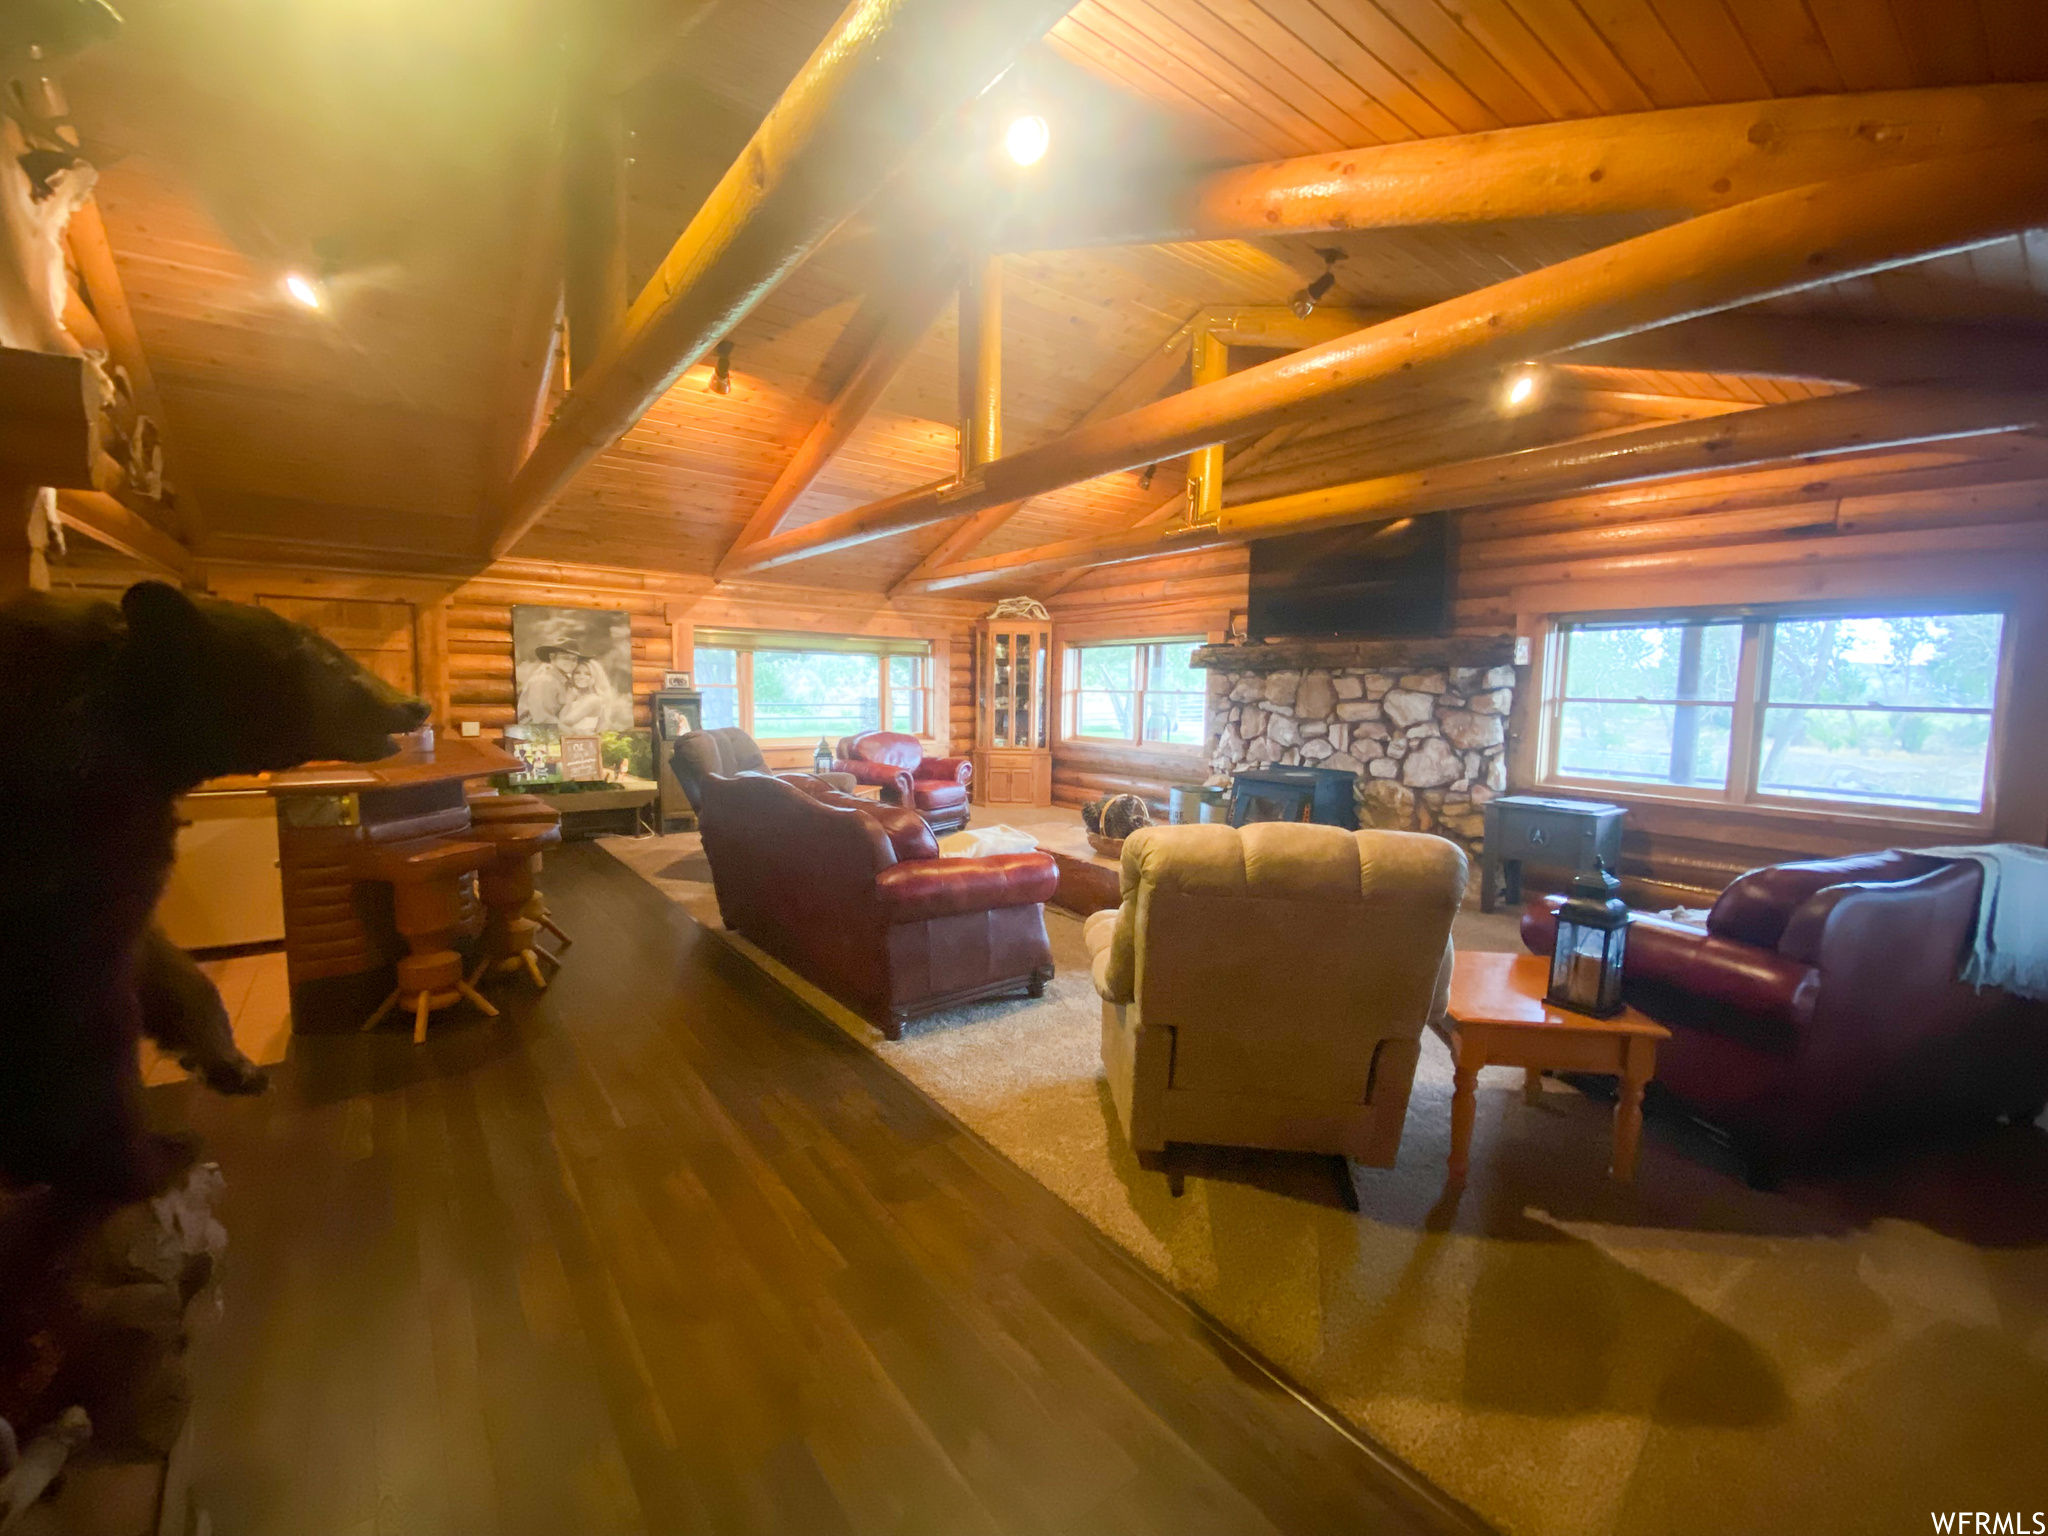 Living room with vaulted ceiling with beams, log walls, a fireplace, and wood ceiling